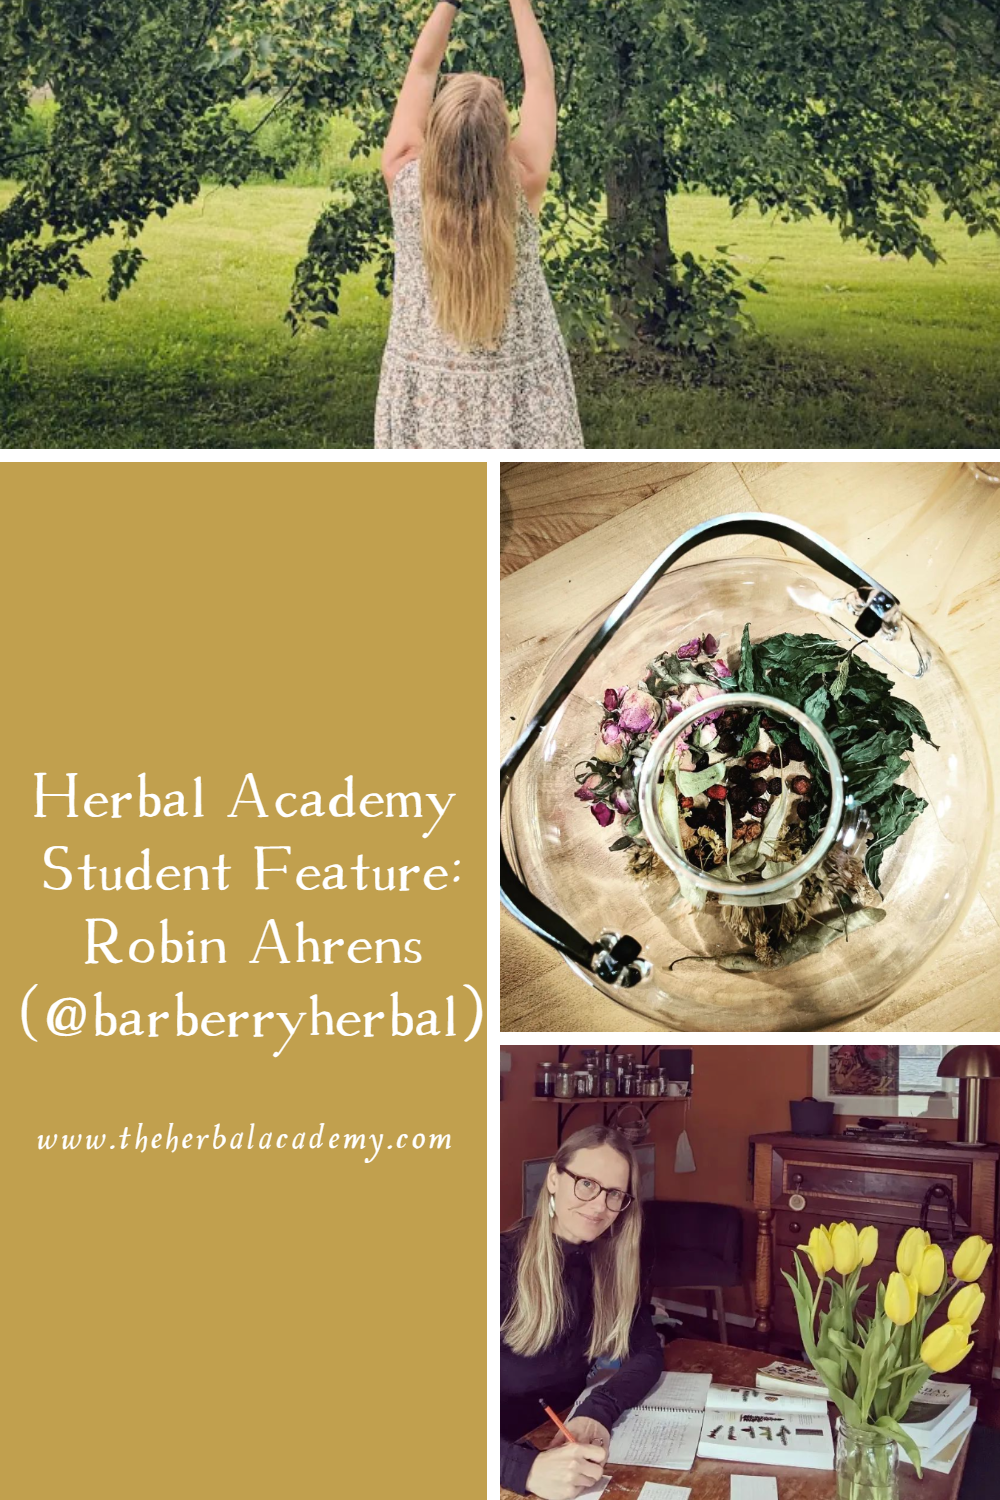 Herbal Academy Student Feature: Robin Ahrens (@barberryherbal) | Herbal Academy | This interview is with Robin Ahrens who owns Barberry Herbal and teaches others how to forage and learn about the plants growing around them.